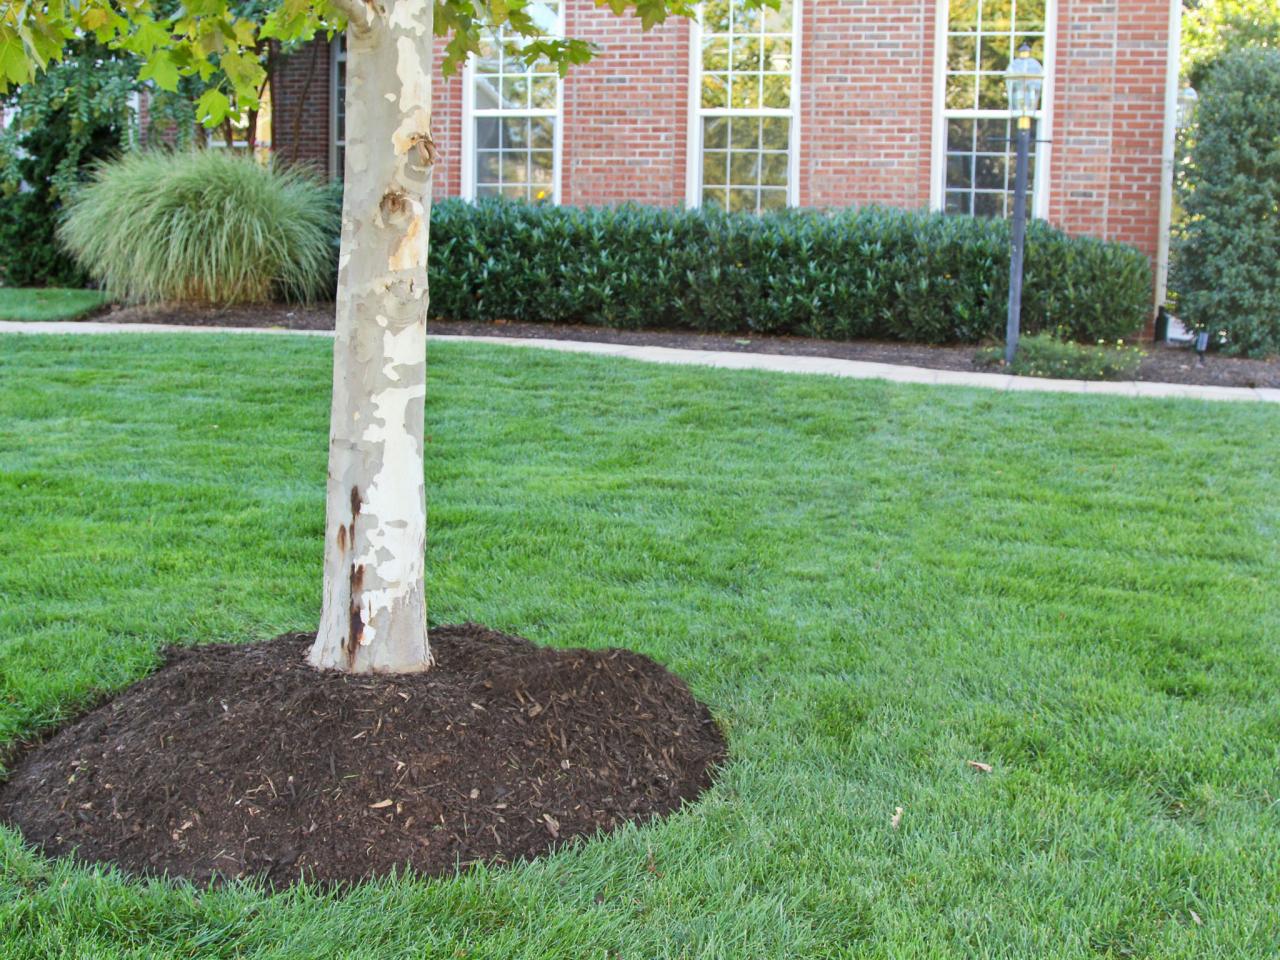 for shrubs and mulch trees